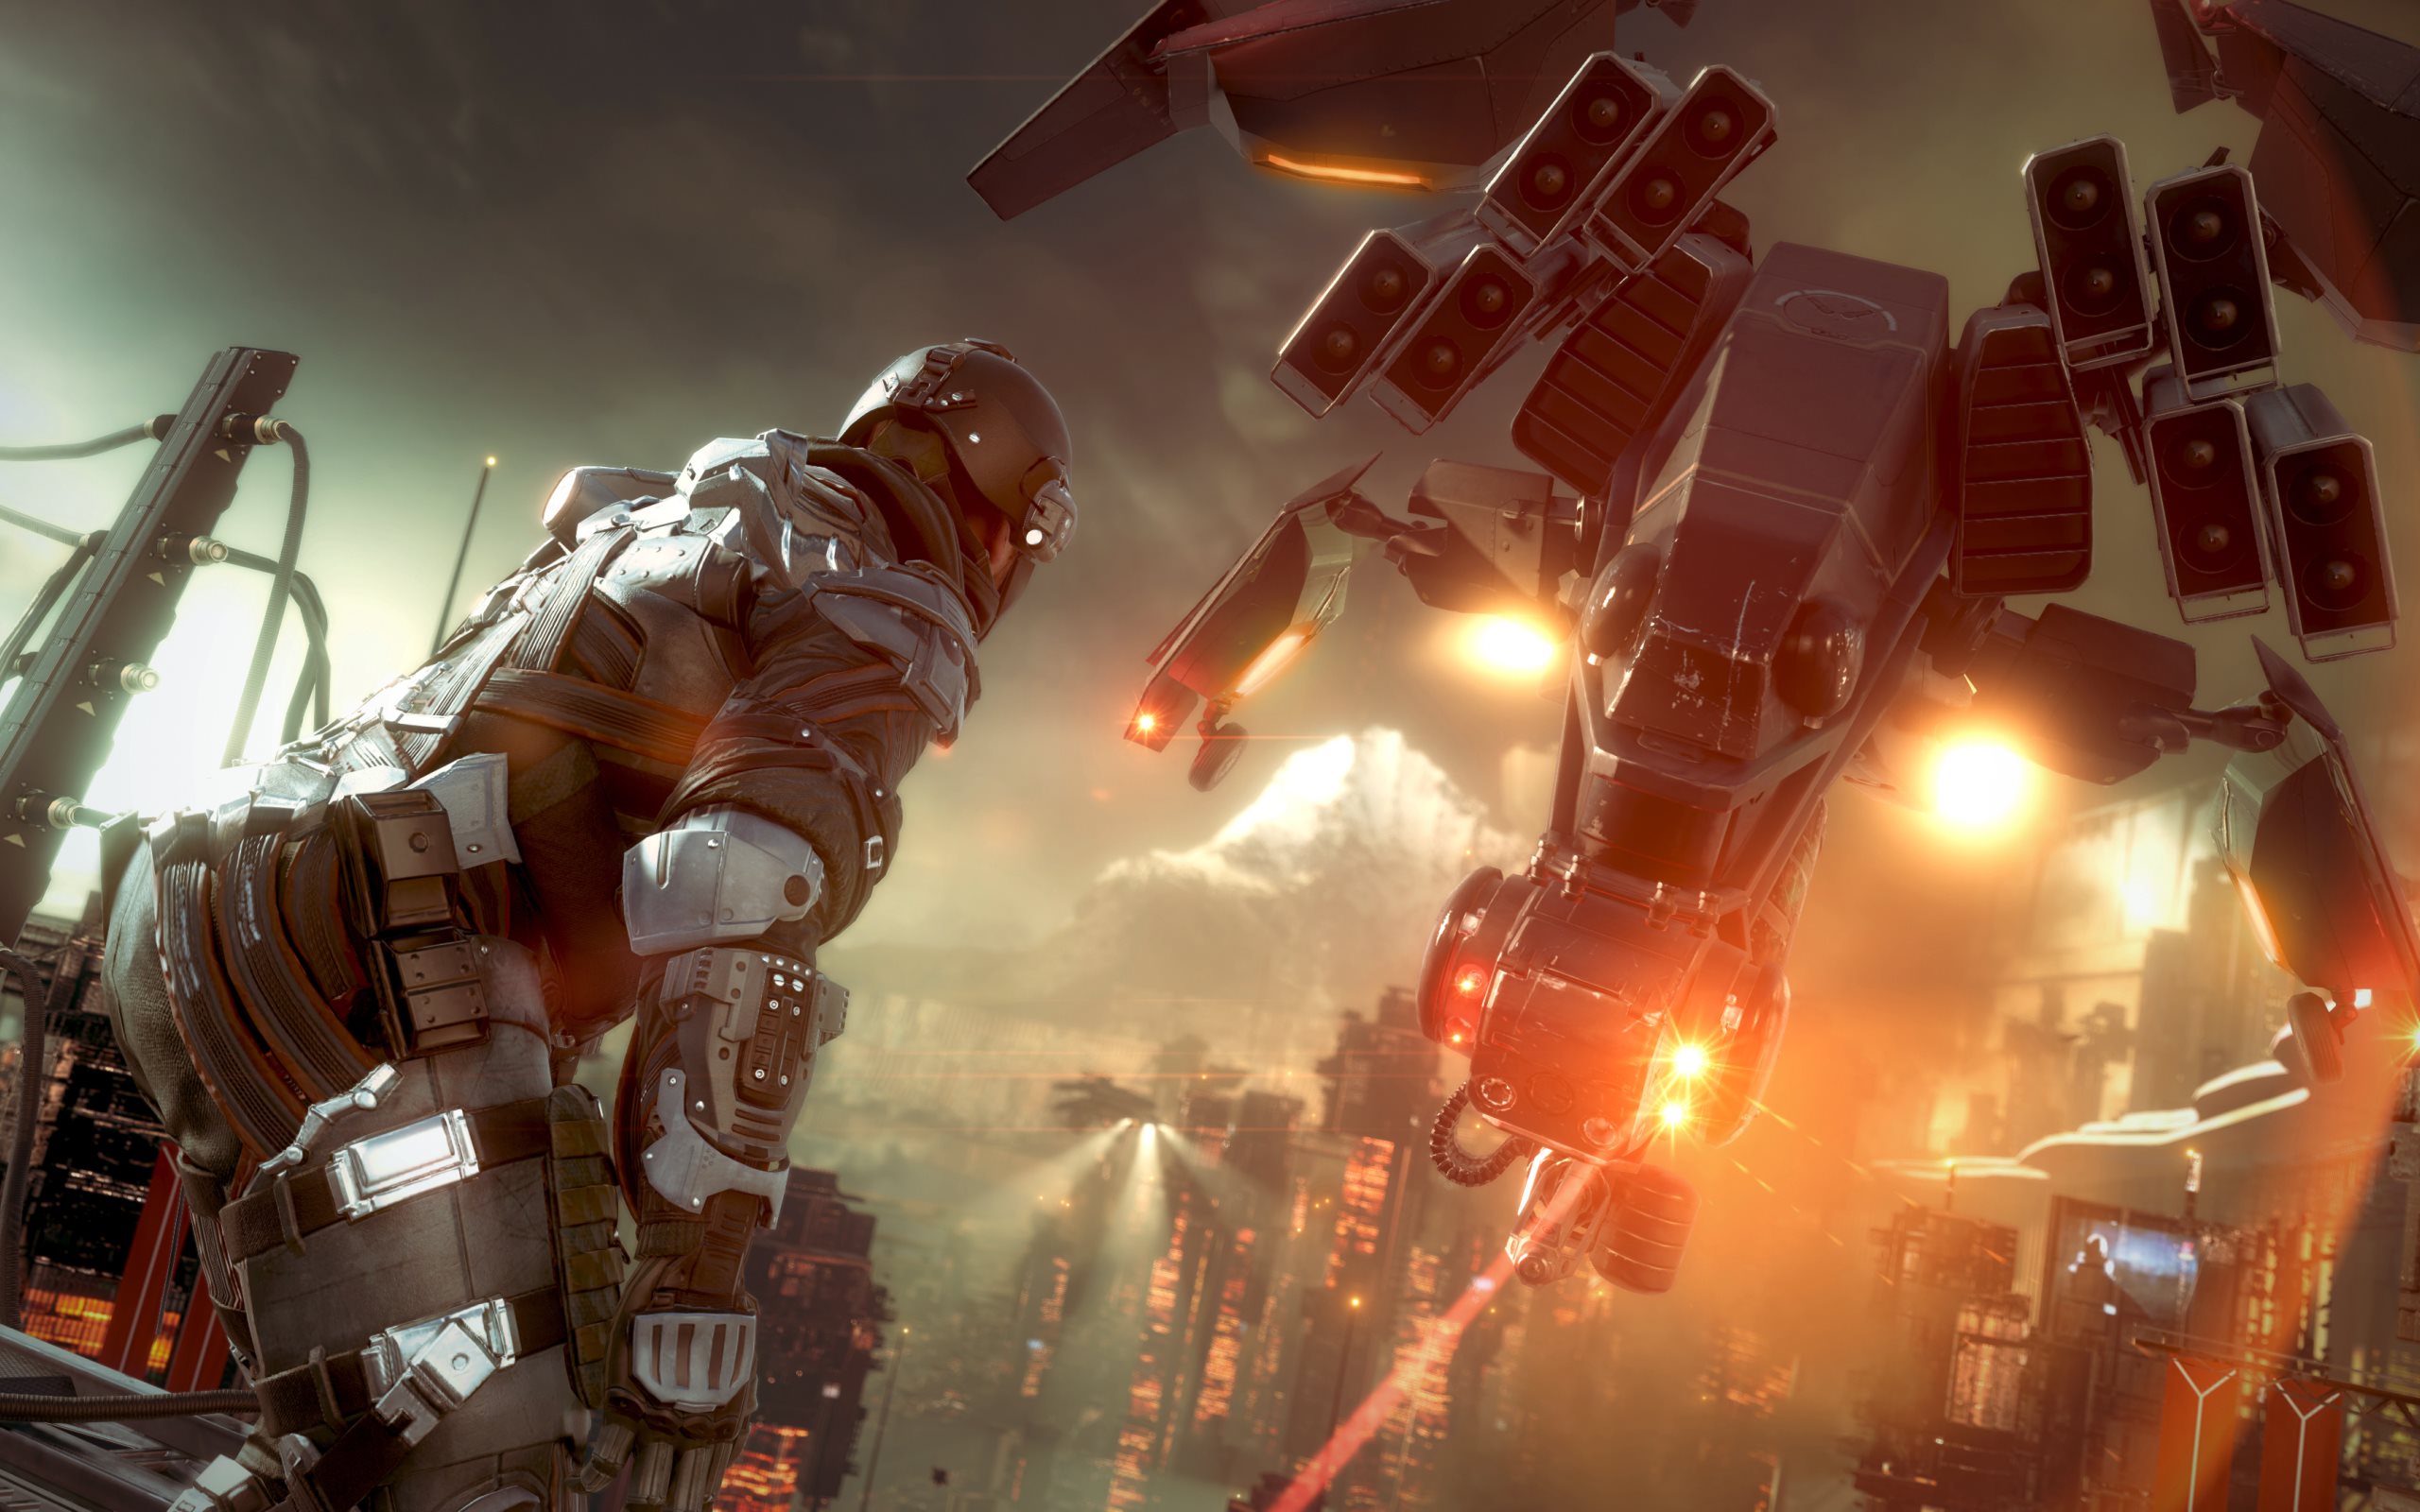 Video Game Killzone: Shadow Fall HD Wallpaper | Background Image